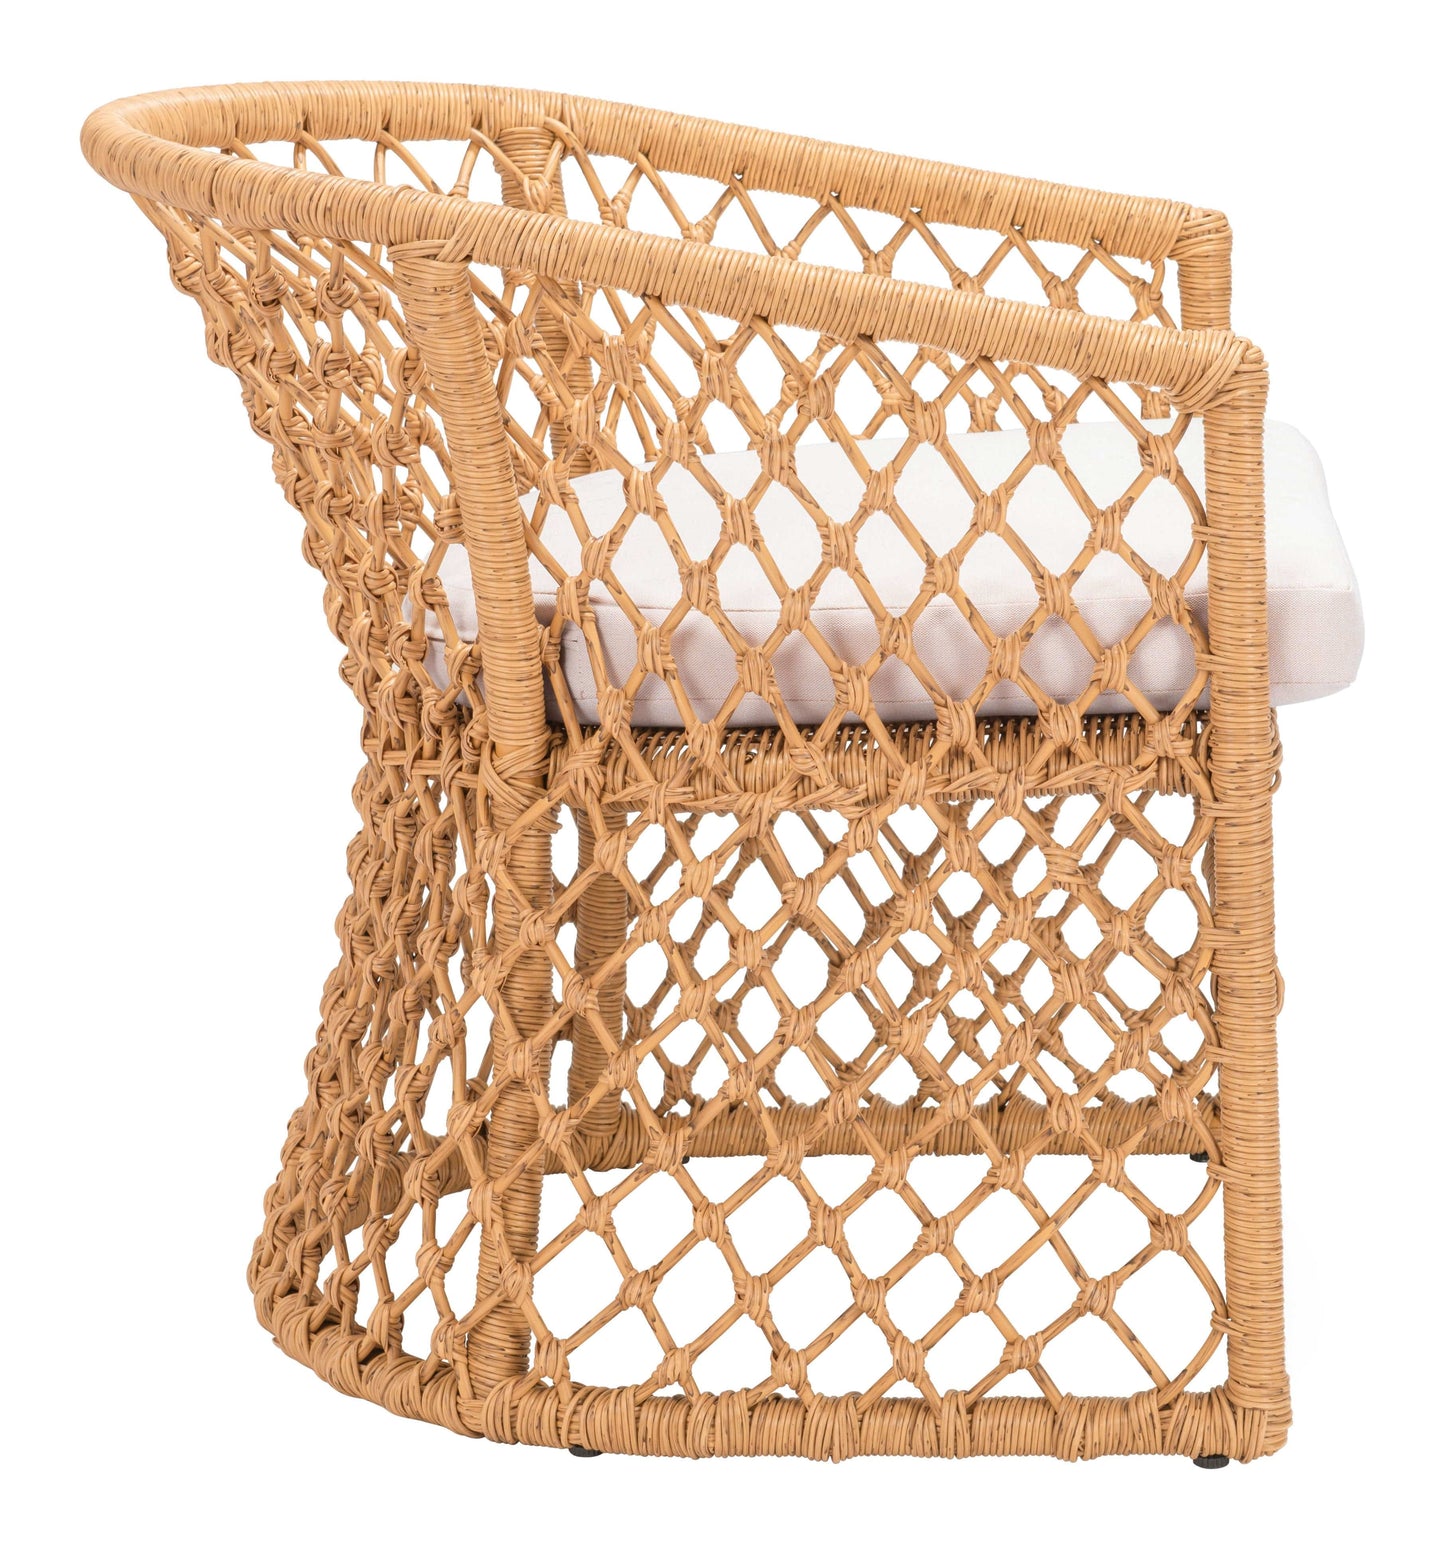 Side View - Materials: Powder Coated Aluminum, Synthetic Rattan Weave Polyethylene